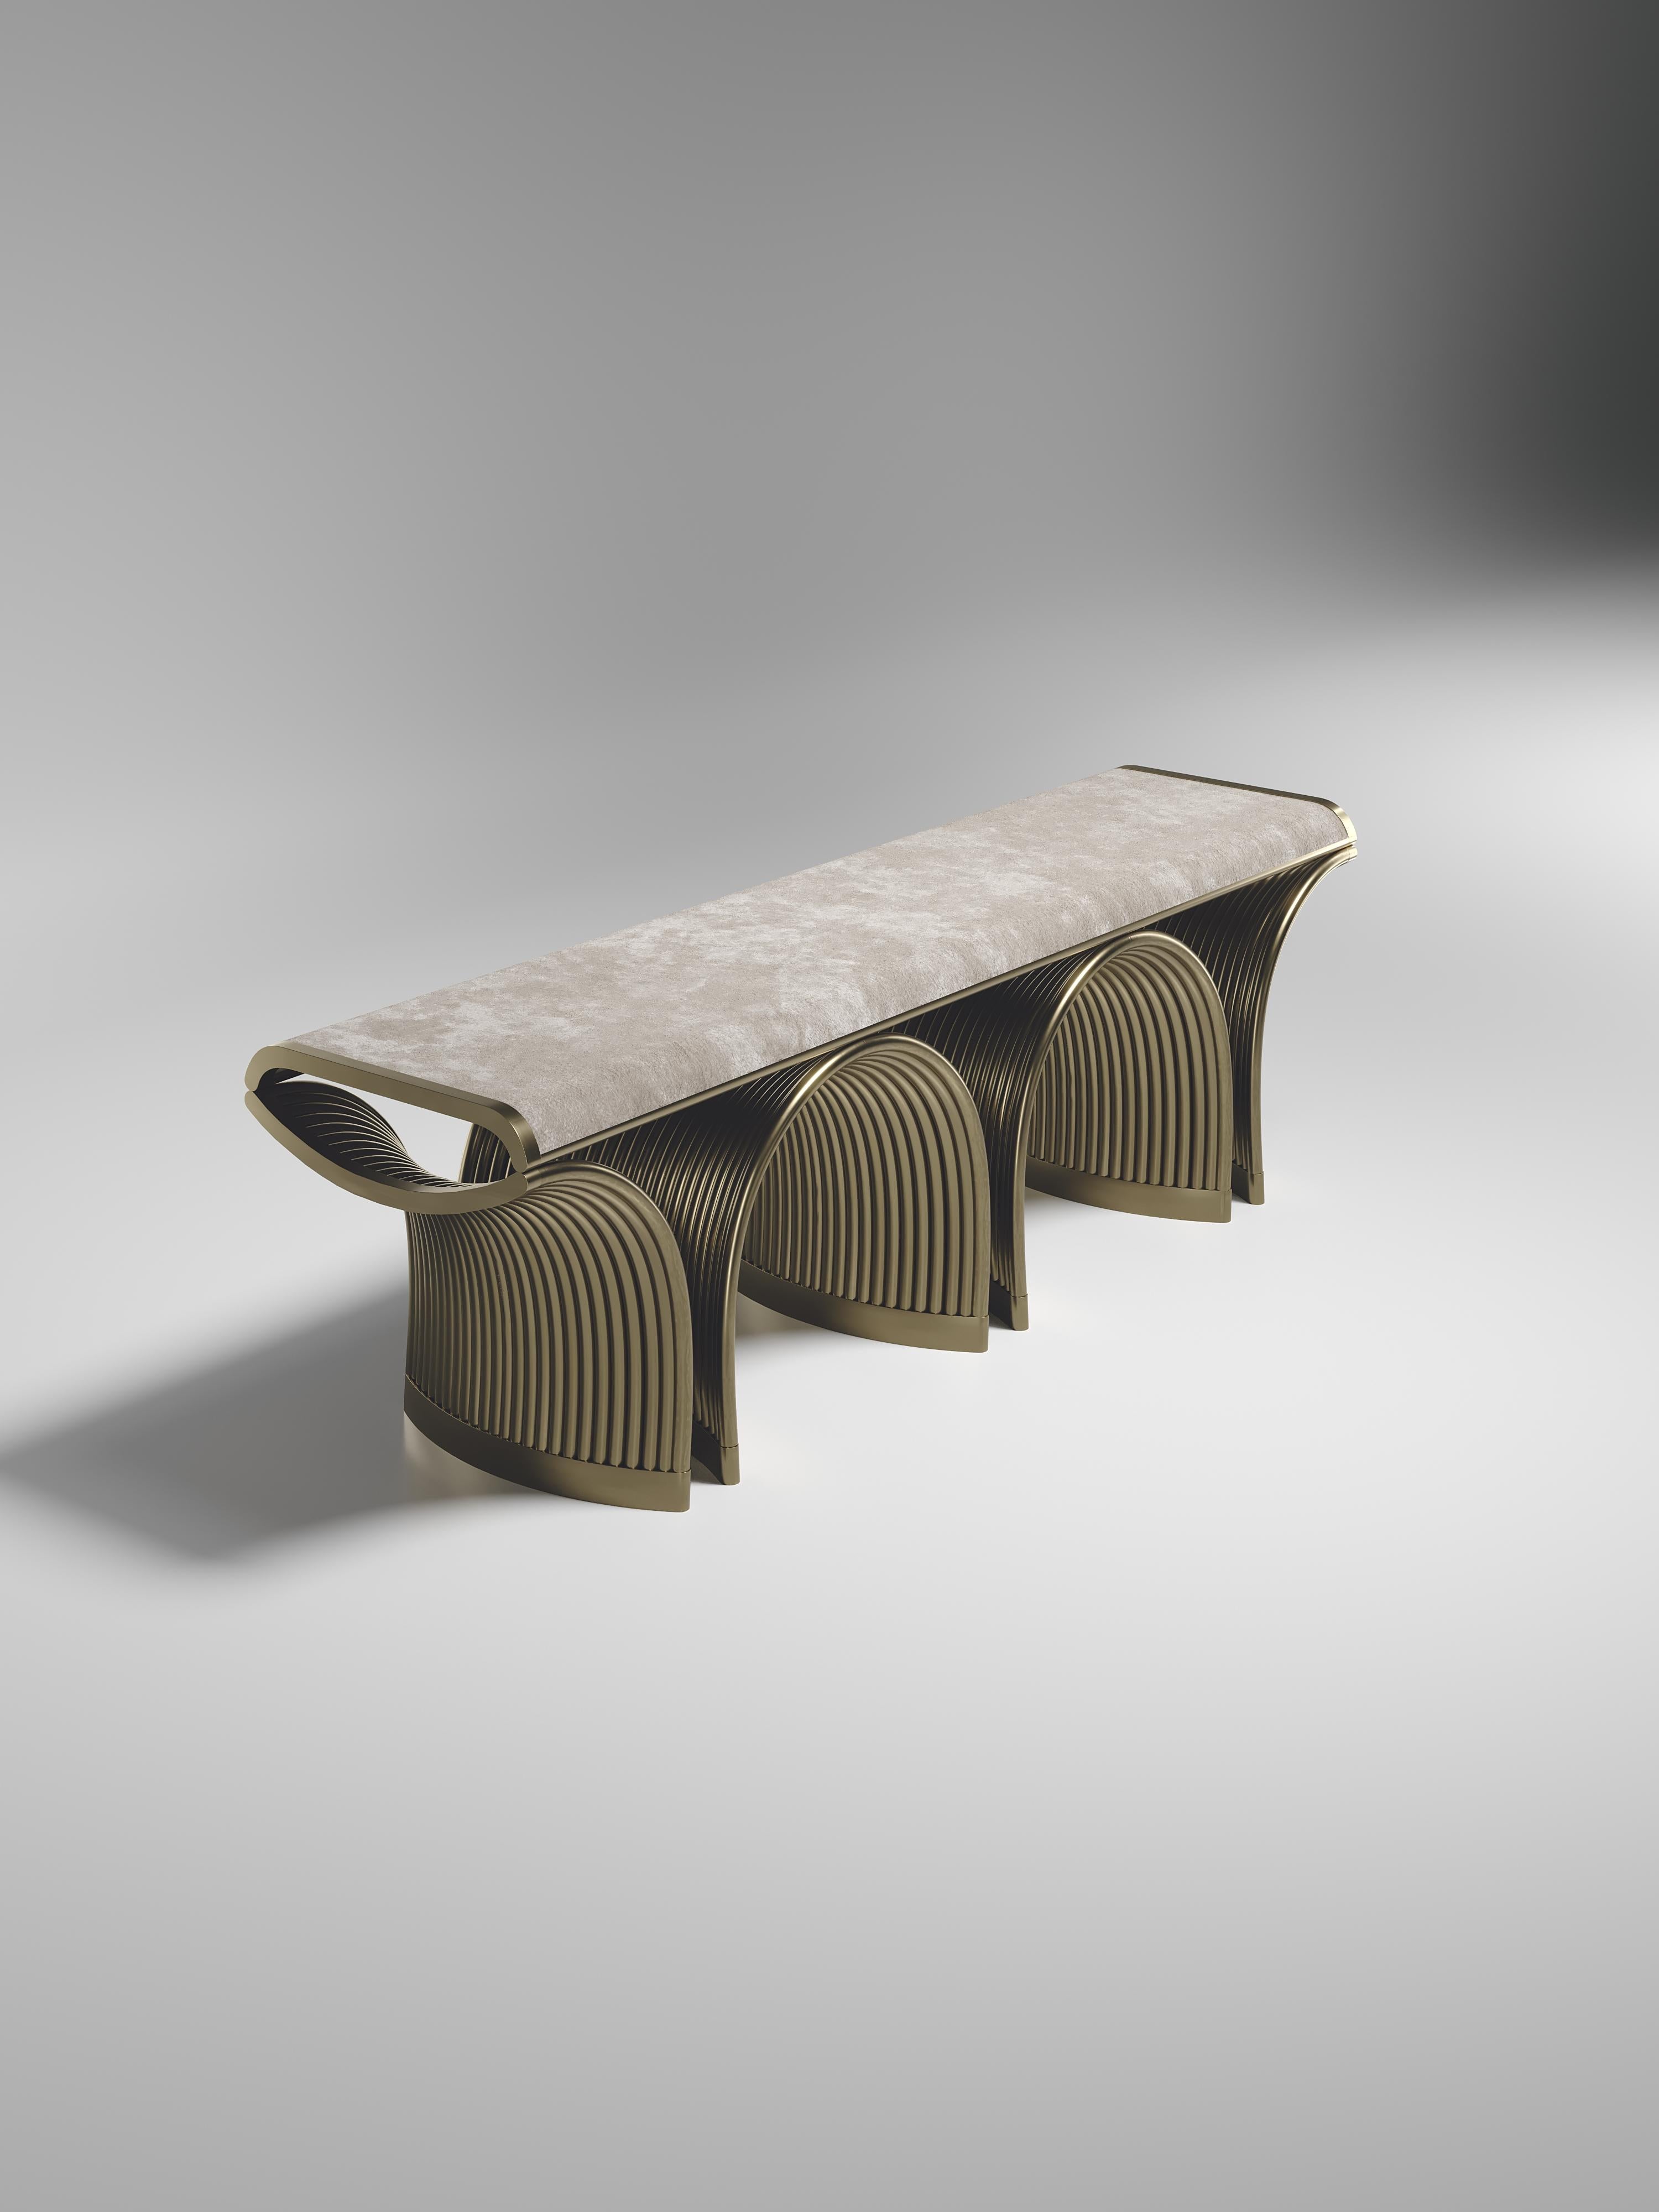 The Nymphea bench by R&Y Augousti upholstered in cream velvet with bronze-patina brass details explores the brand's iconic DNA of bringing old world artisanal craft into a contemporary and utterly luxury feel. The base of the bench is handcrafted